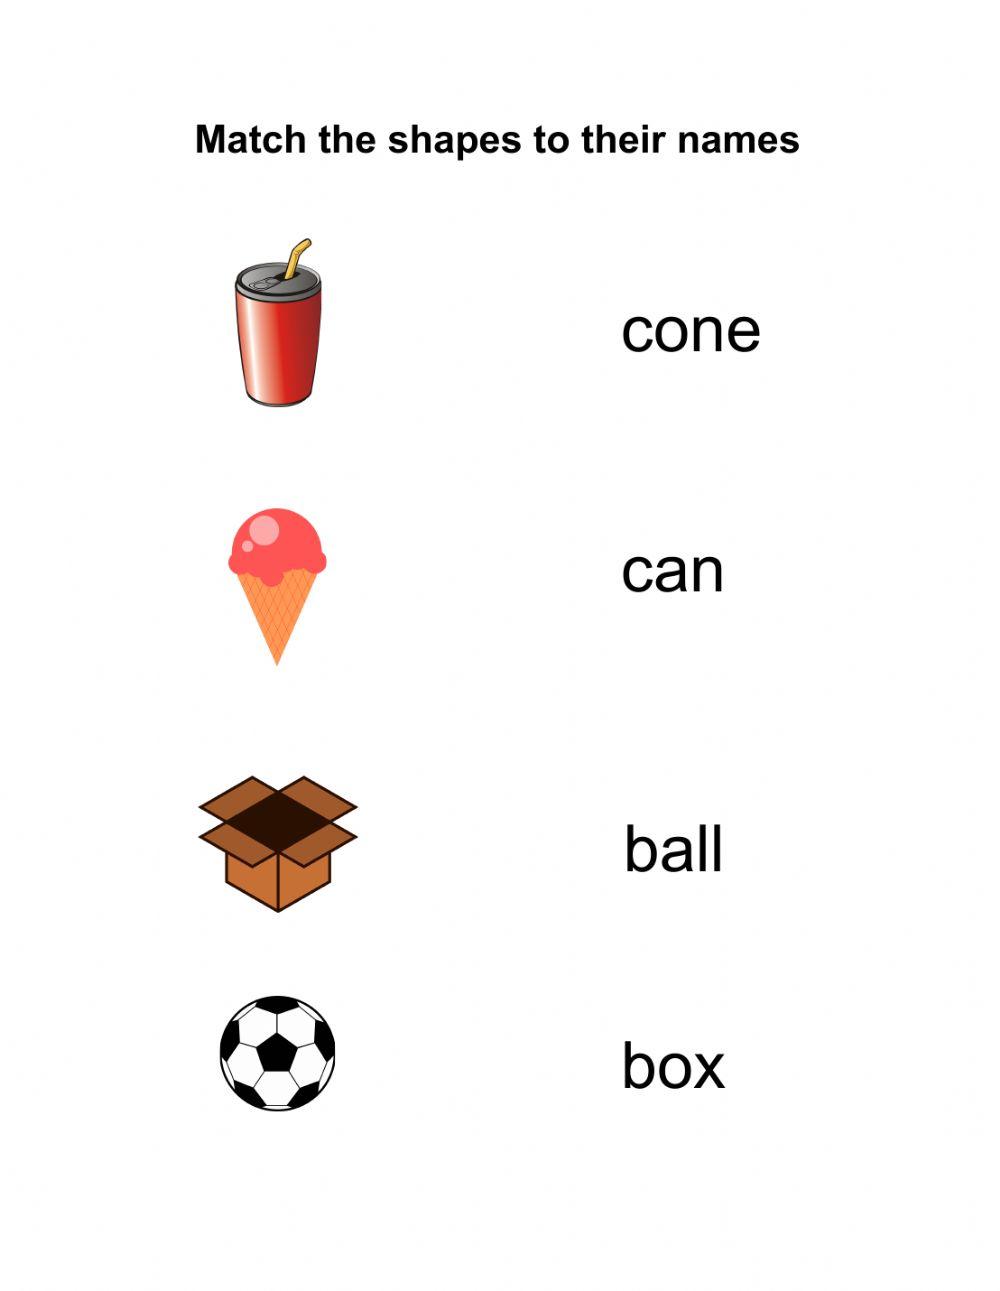 Match the shapes to their names